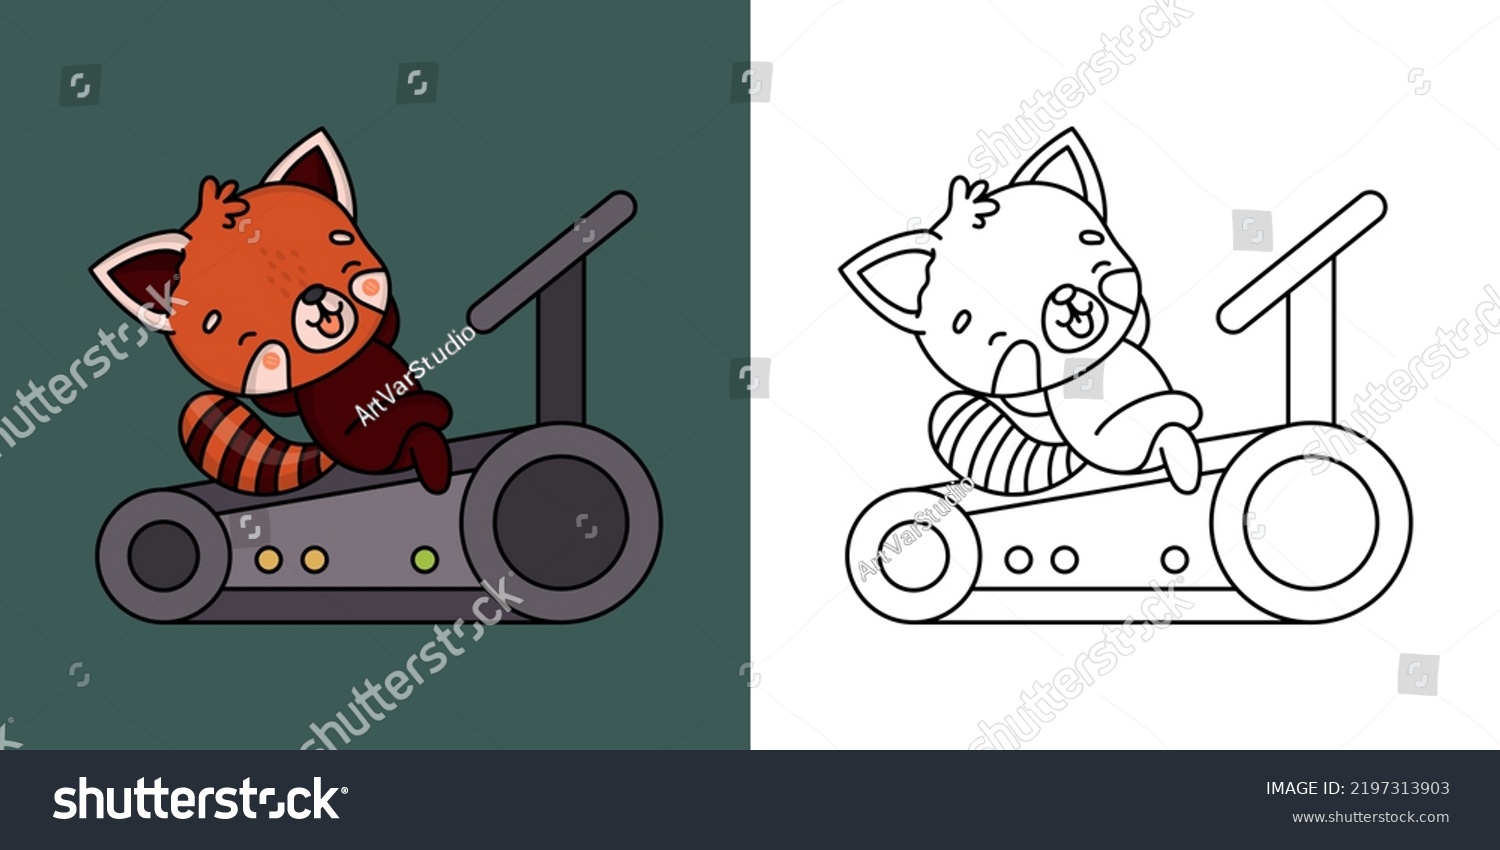 SVG of Red Panda Sportsman Clipart for Coloring Page and Multicolored Illustration. Adorable Animal Athlete. Vector Illustration of a Kawaii Animal for Coloring Pages, Prints for Clothes, Stickers.
 svg